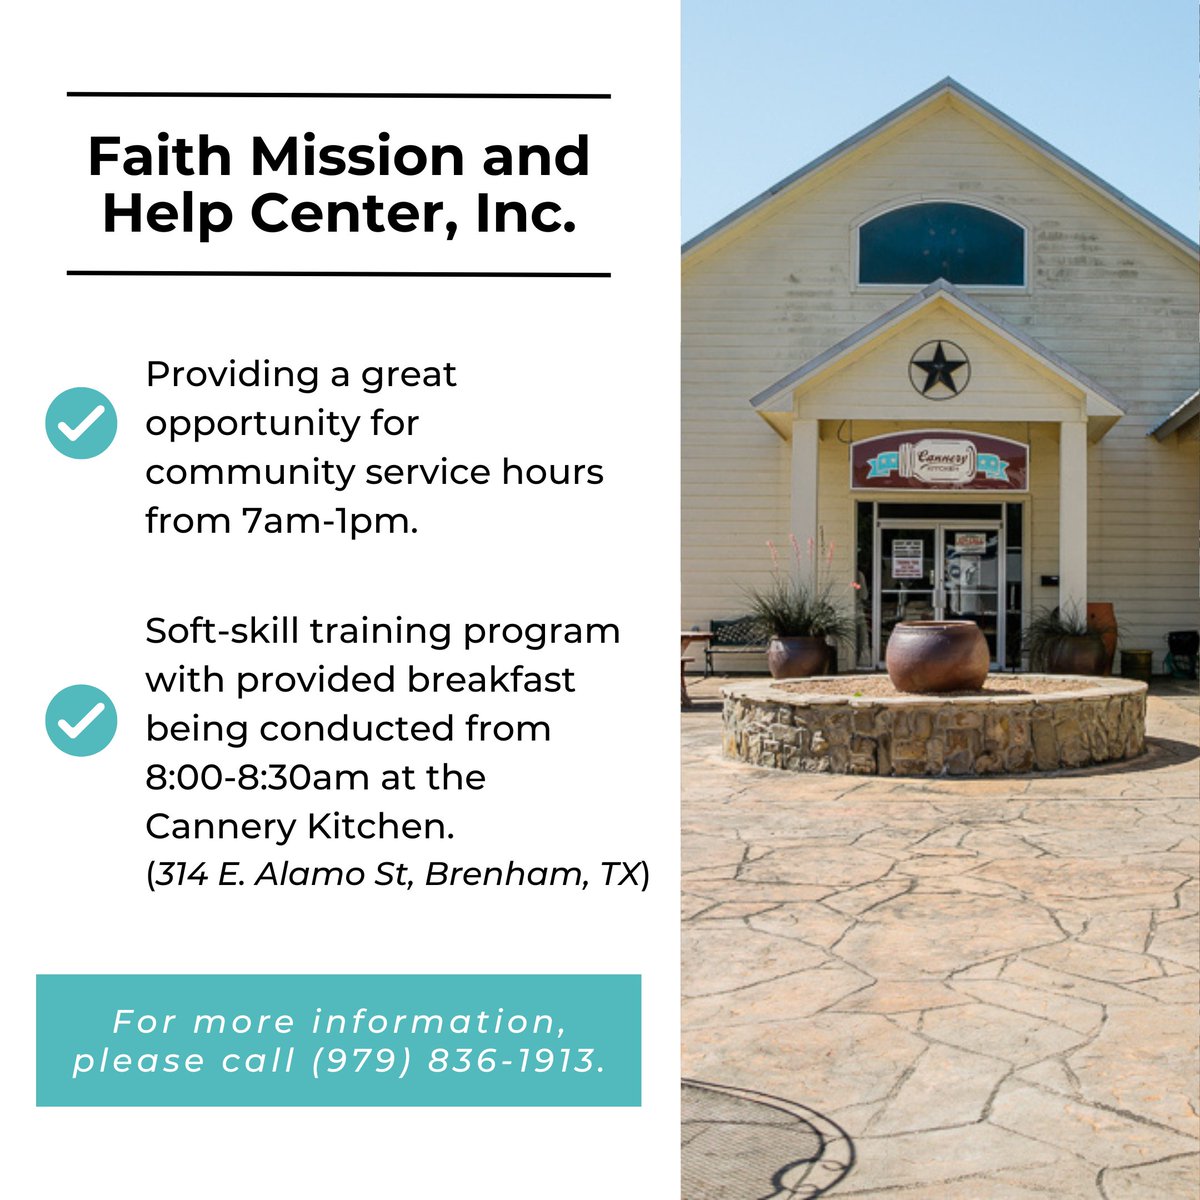 Faith Mission and Help Center is offering service hours from 7:00 AM to 1:00 PM. Additionally, a soft-skill training program, complete with a FREE breakfast, is being conducted from 8:00 to 8:30 AM at the Cannery Kitchen. Please call (979) 836-1913 for more info.